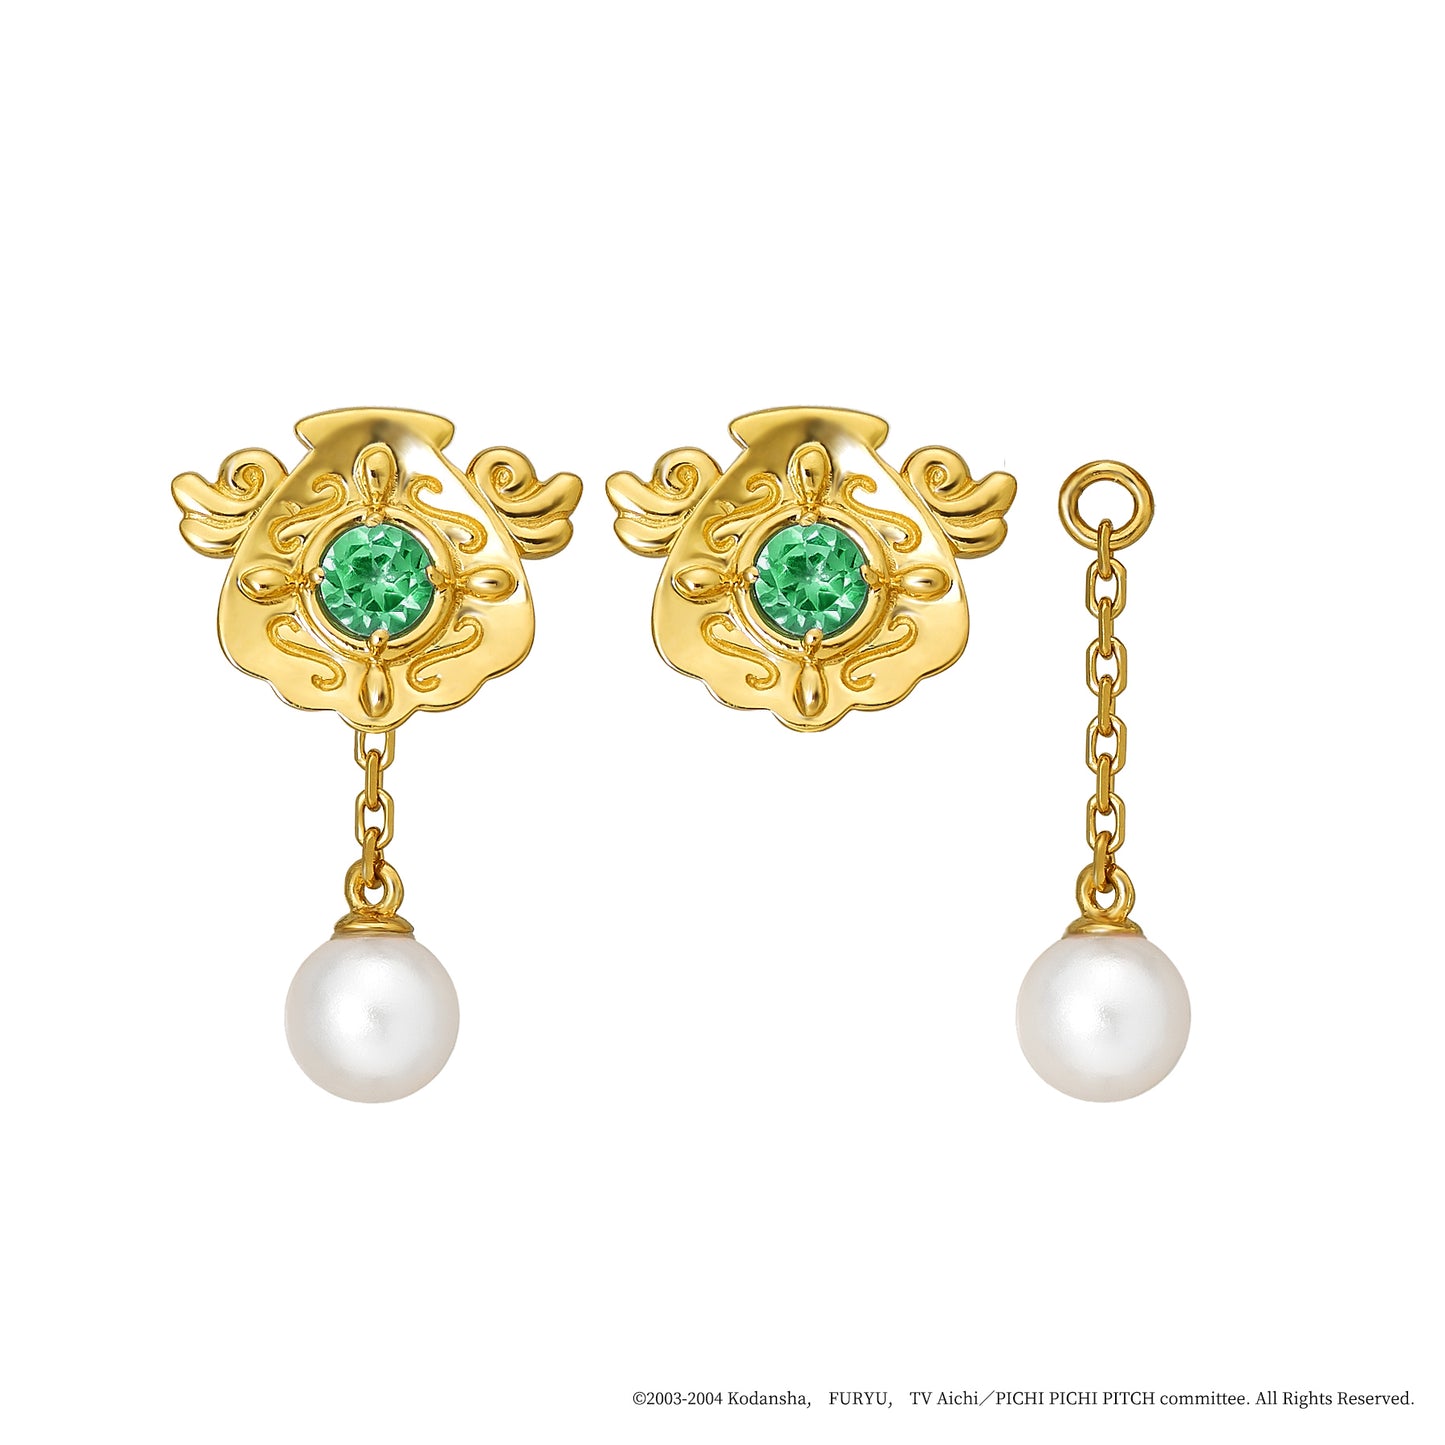 Mermaid Melody Pichi Pichi Pitch - 2WAY Earrings (Rina Toin) - Product Image